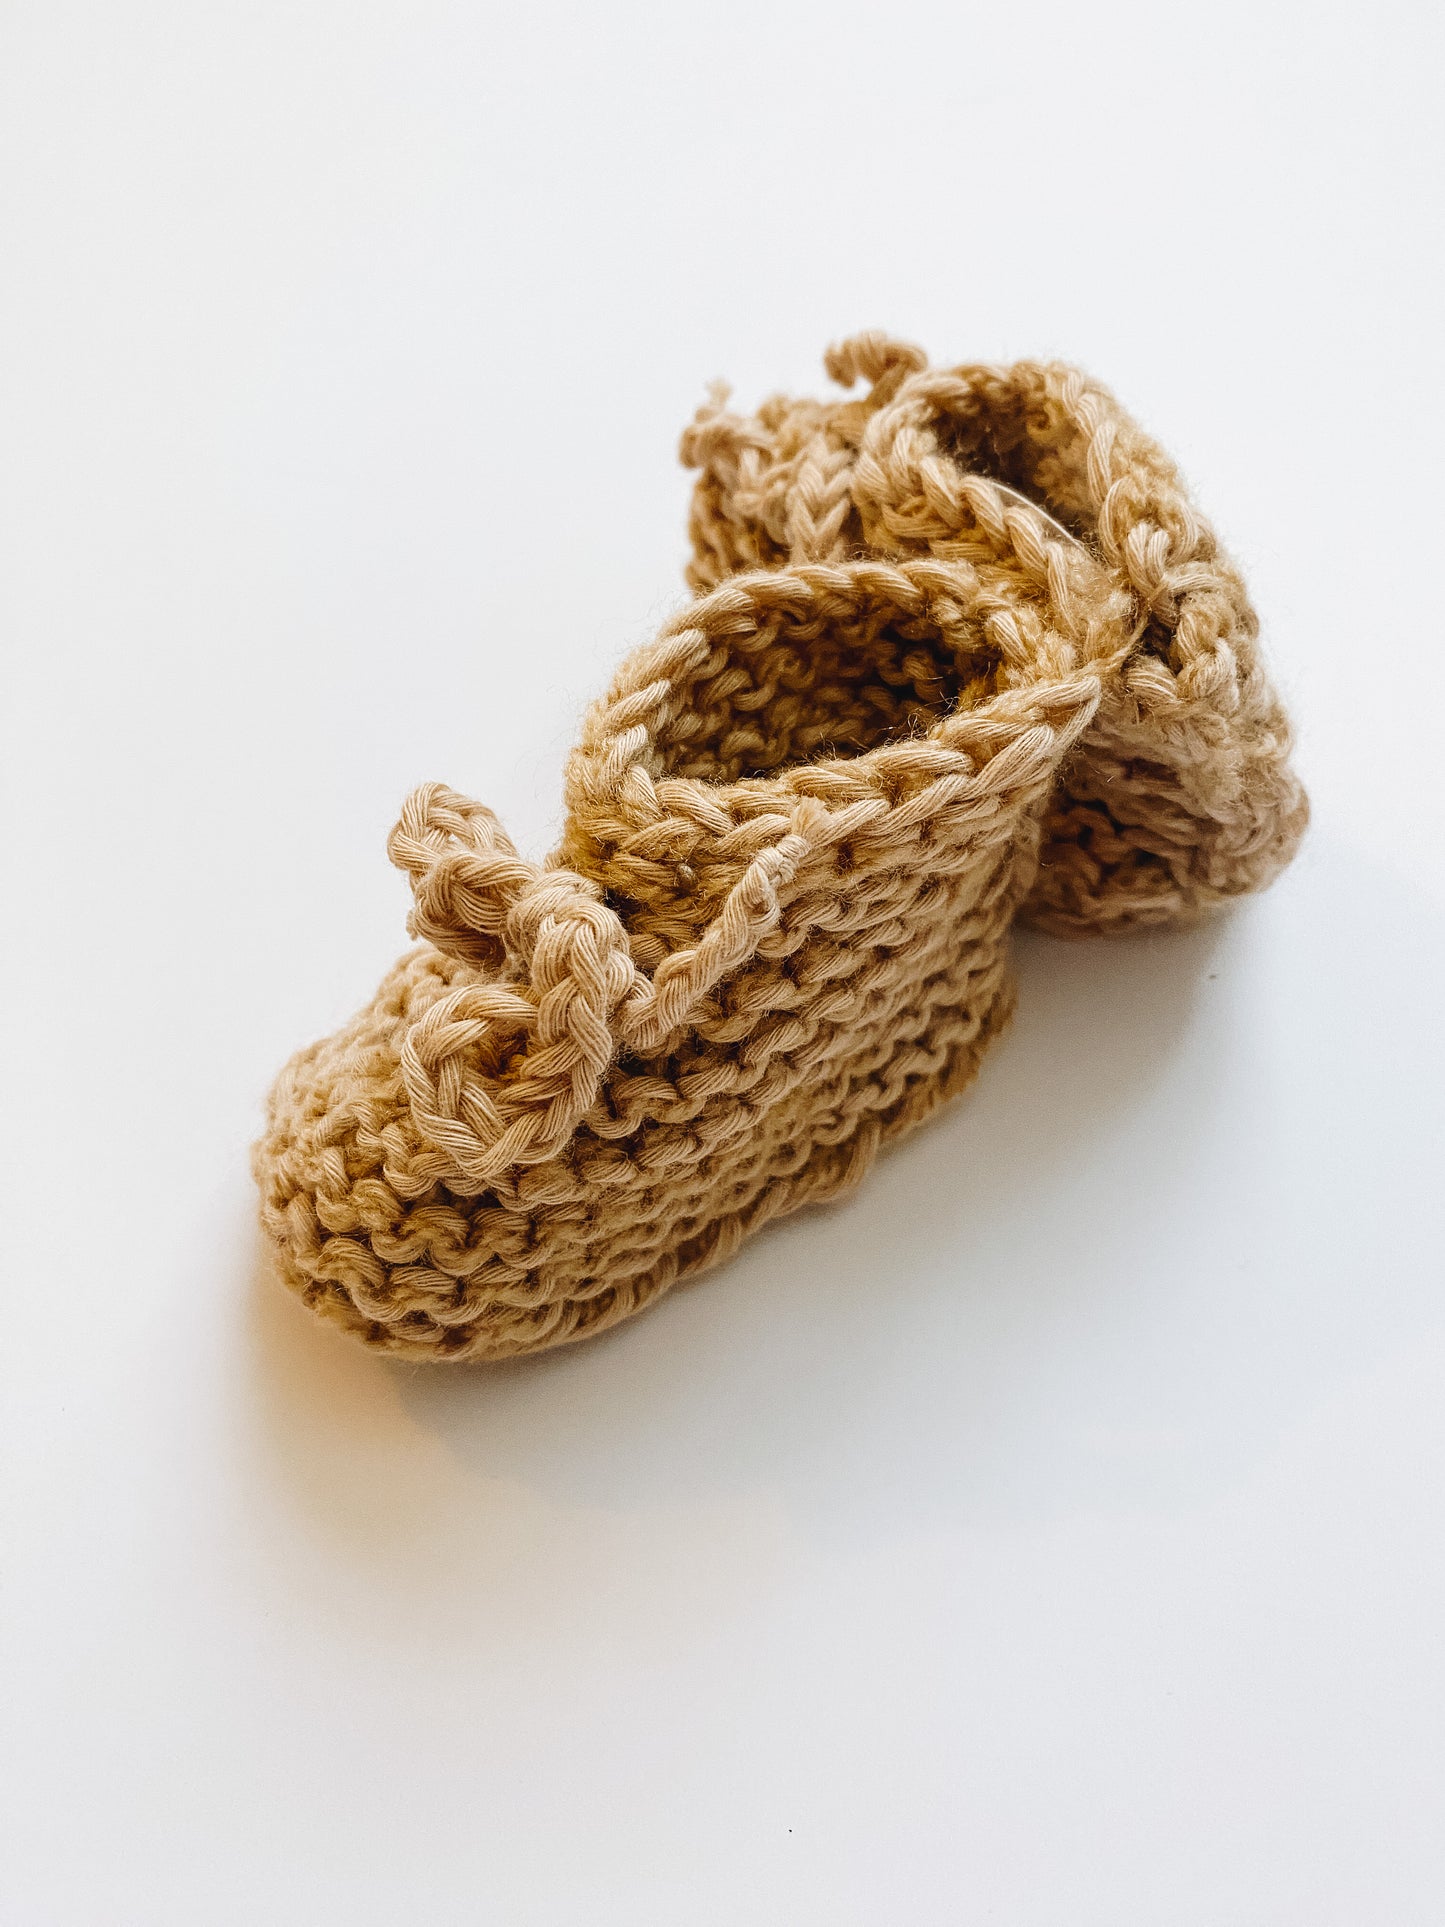 Hand-Knit Baby Booties